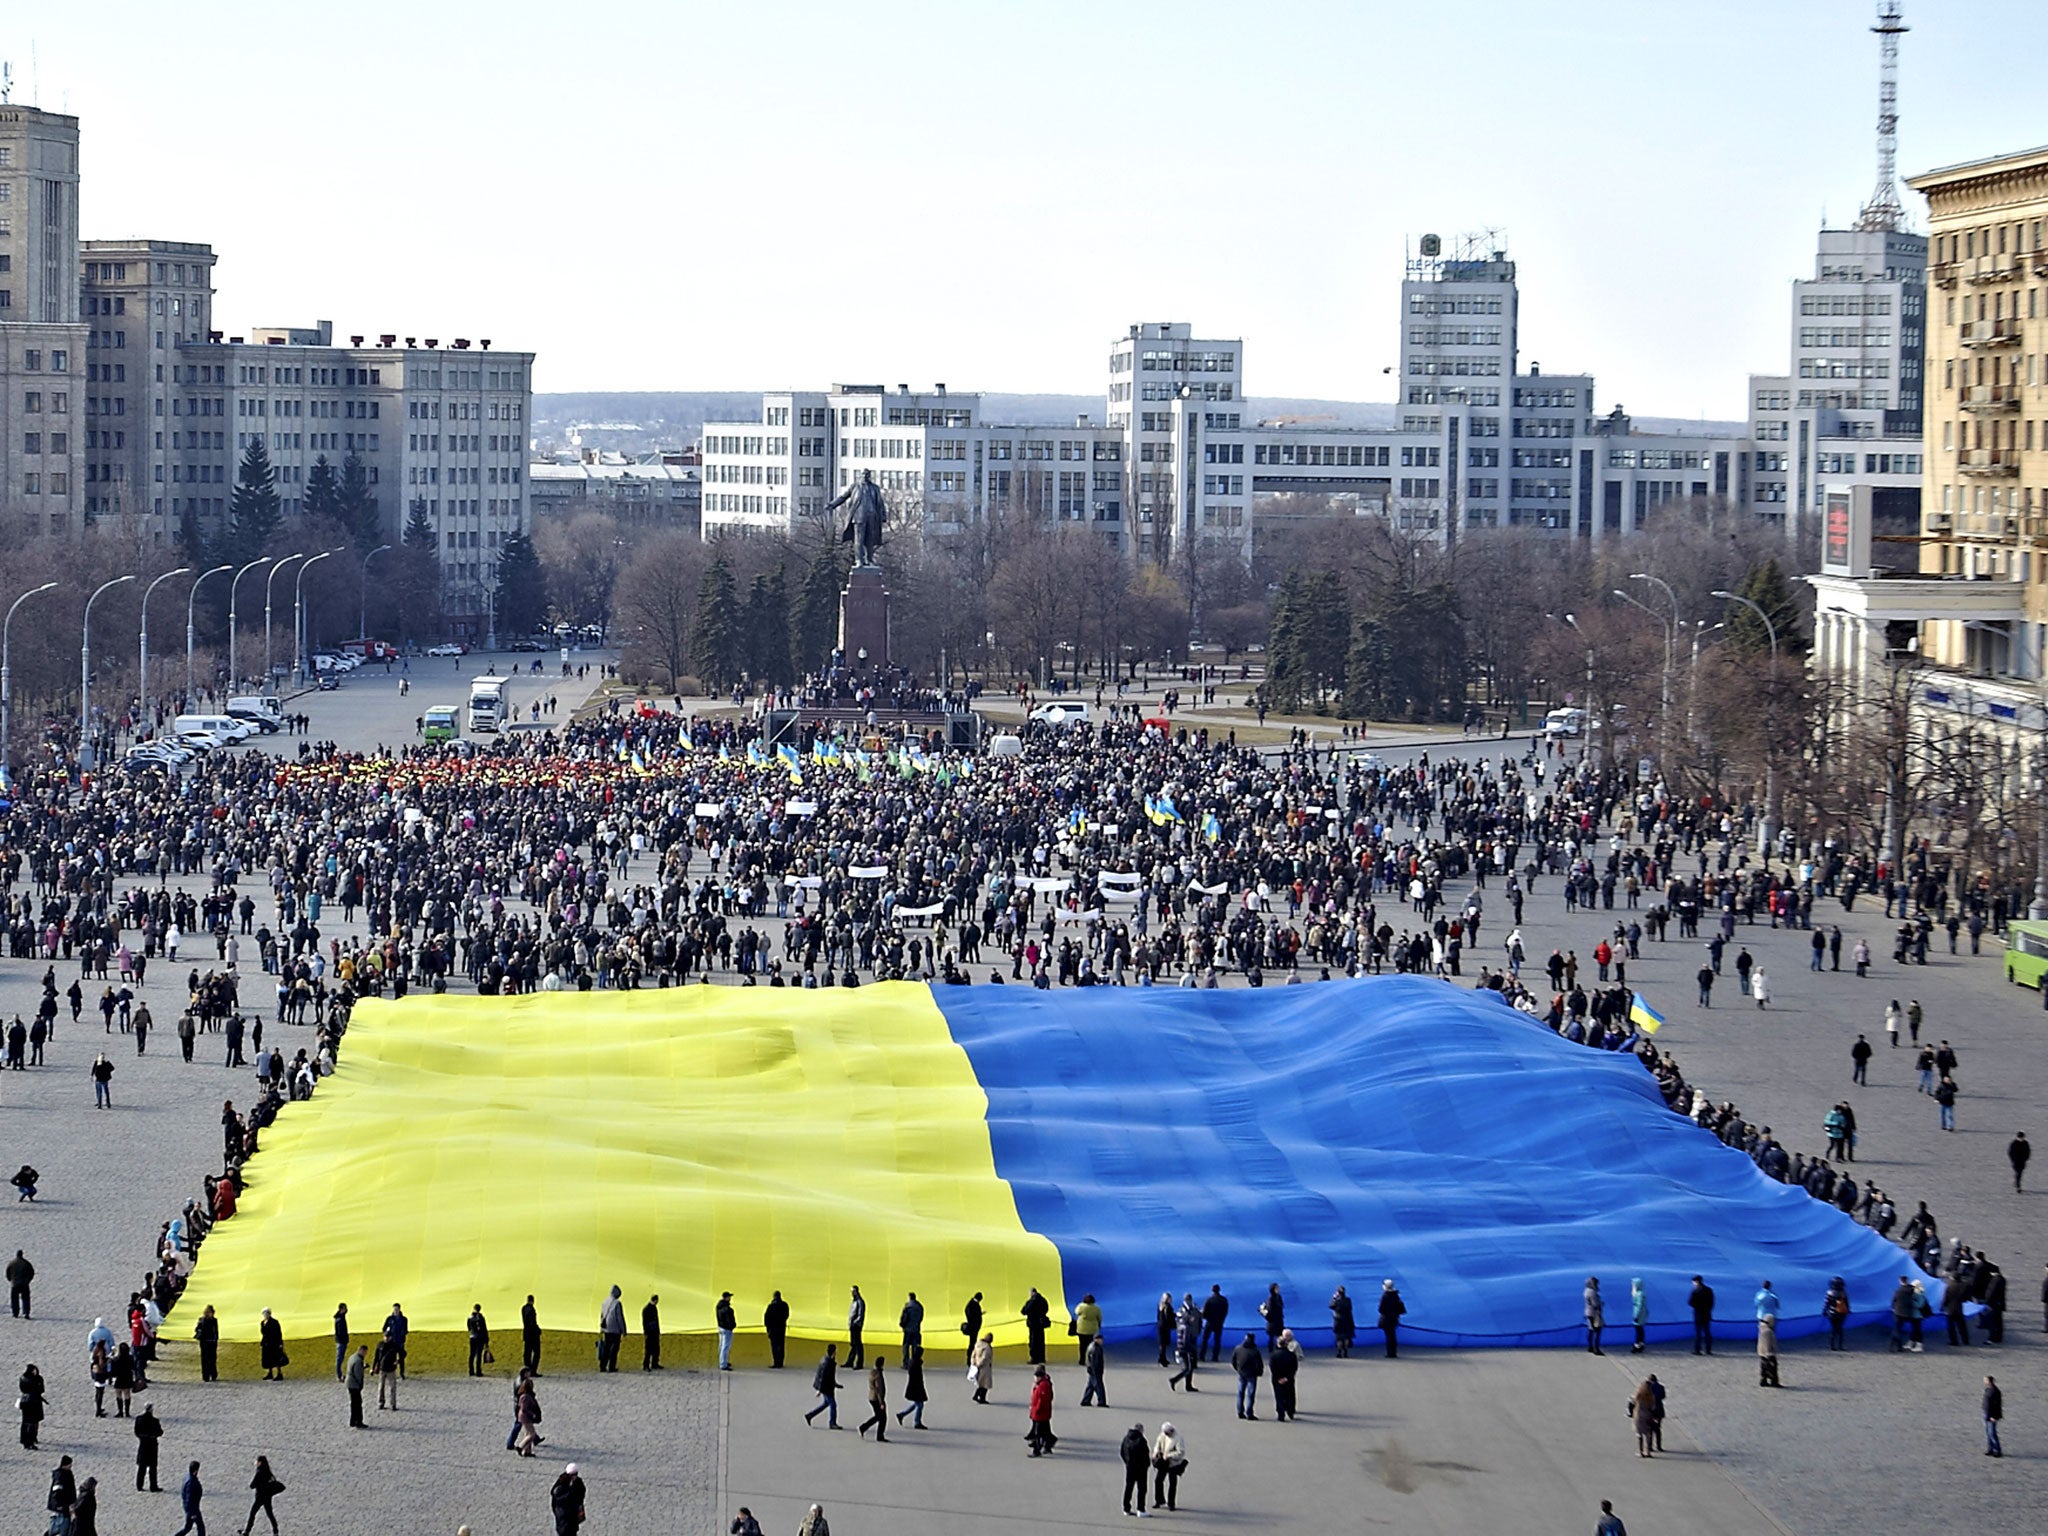 Pro-Ukrainian activists demonstrate a huge yellow-and-blue Ukrainian flag during a rally in support of Ukraine's territorial integrity in the eastern city of Kharkiv 